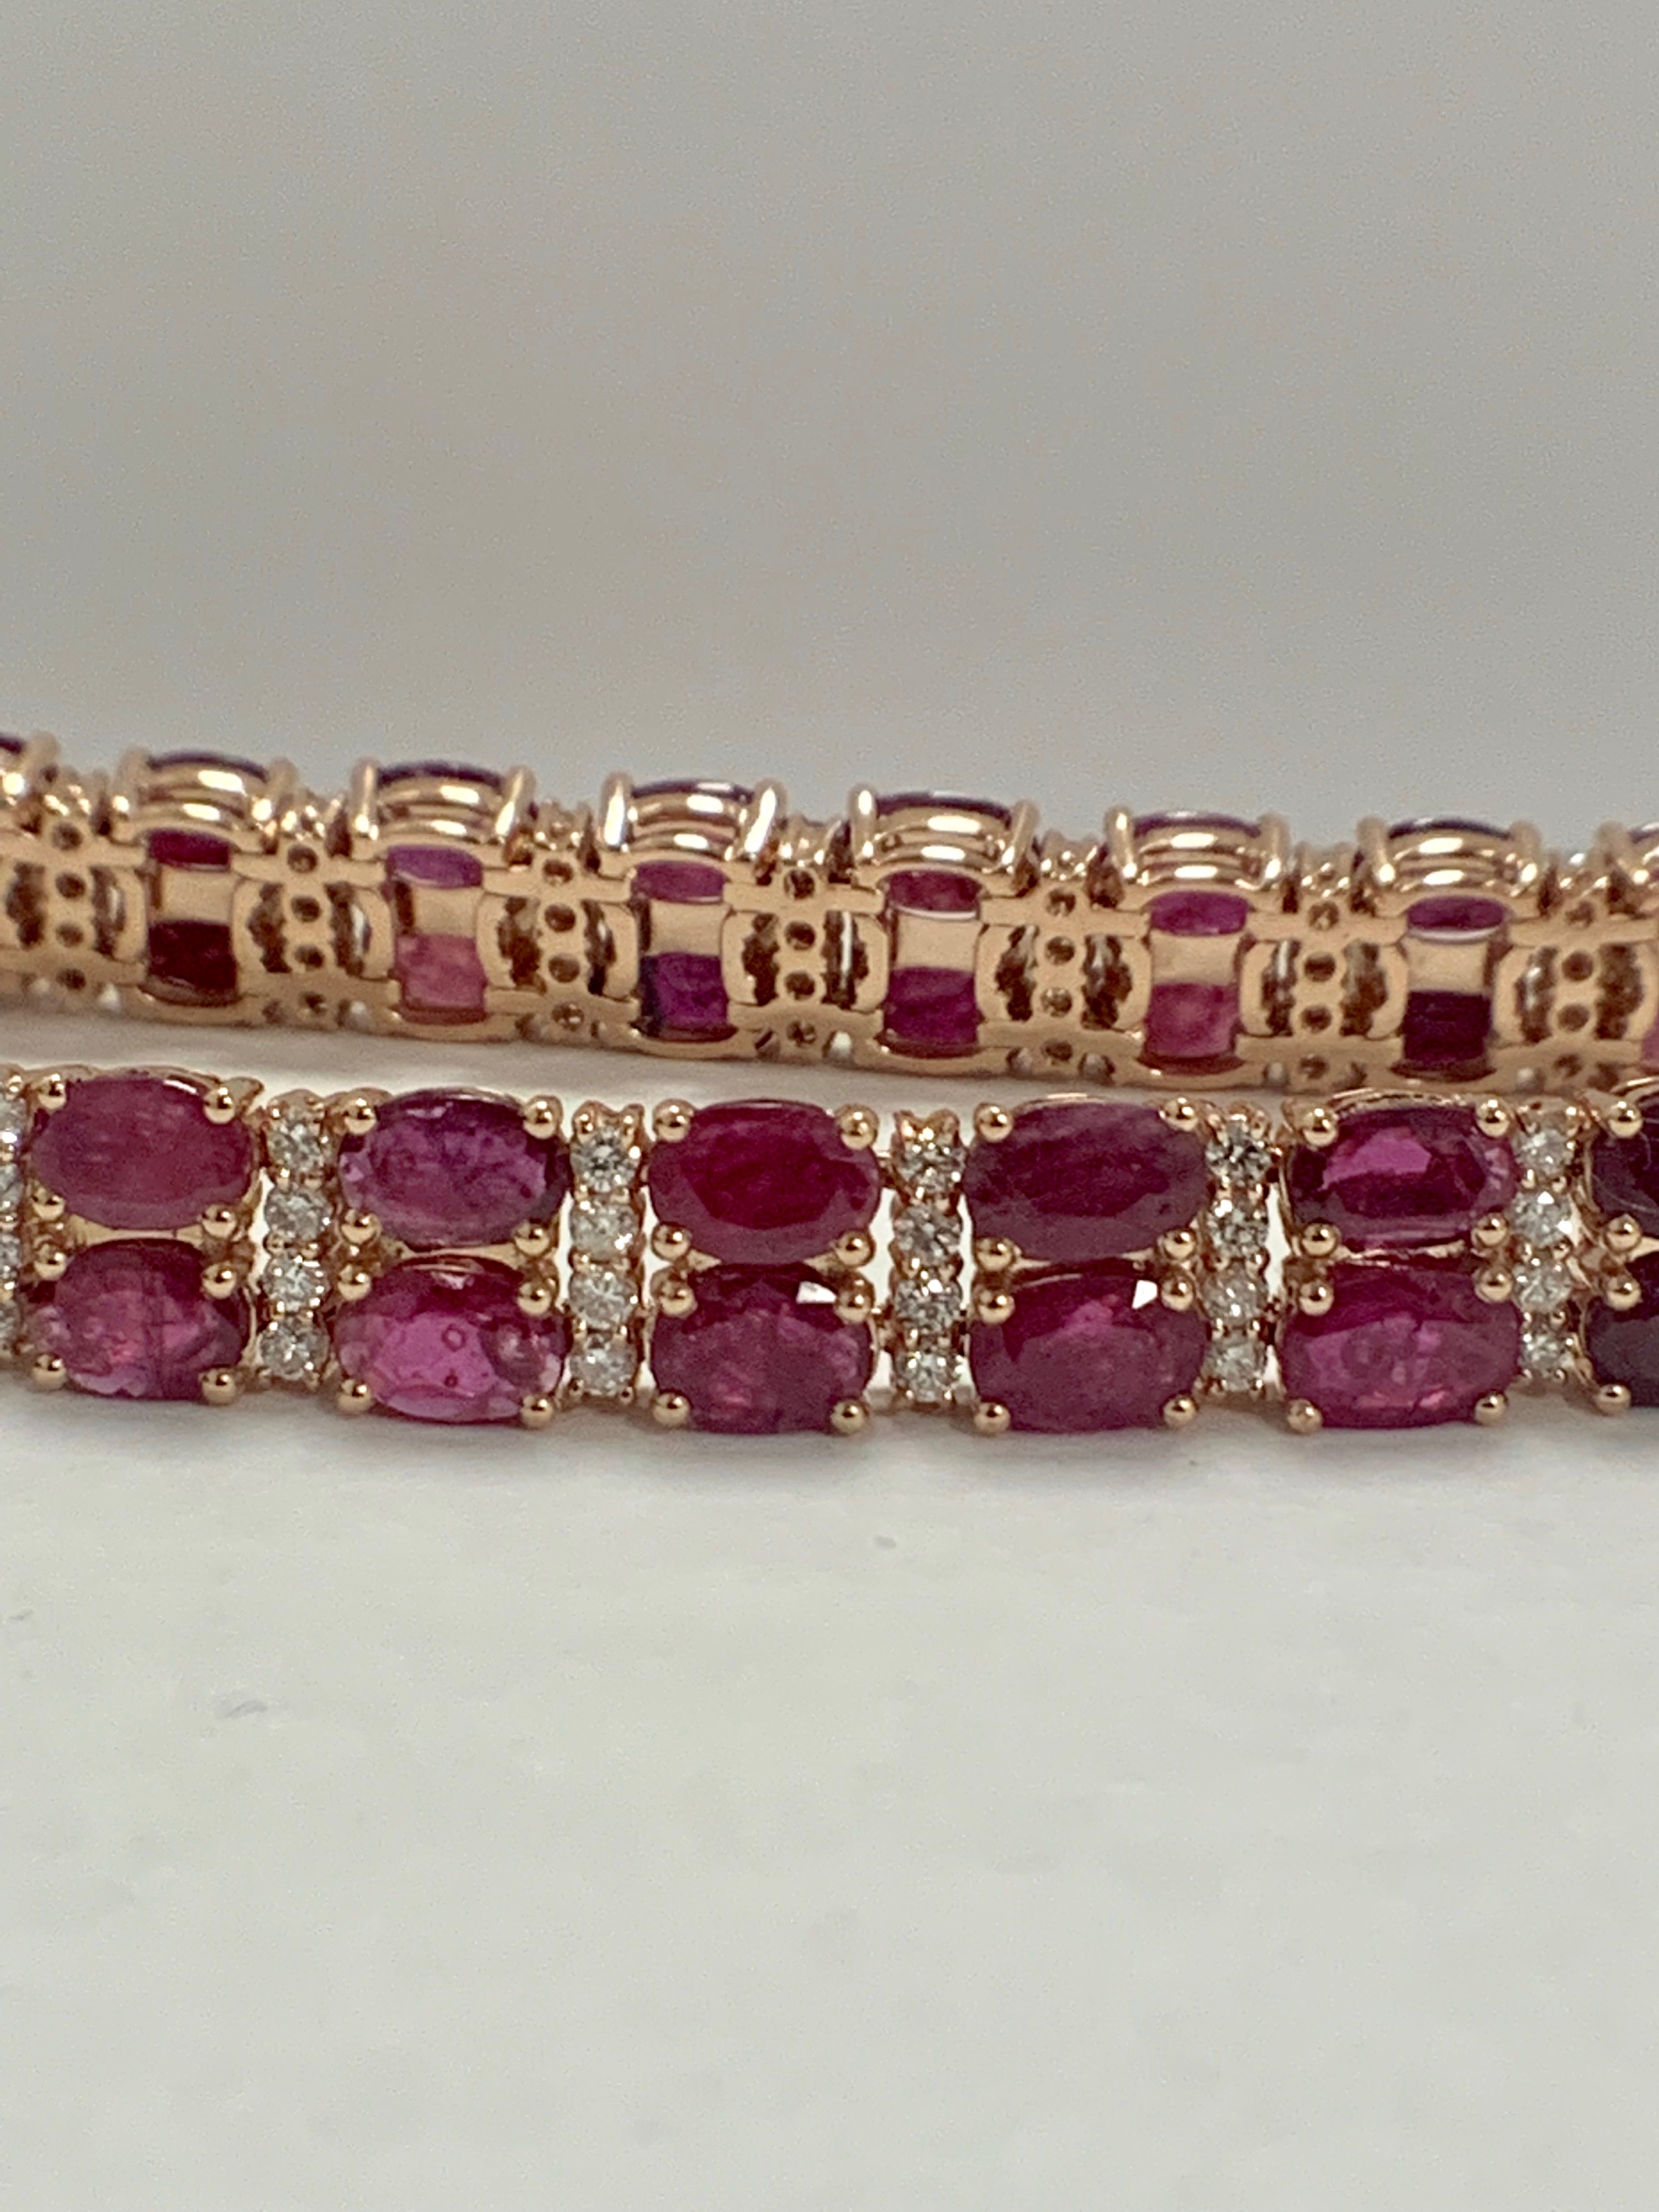 14ct Rose Gold Ruby and Diamond double row bracelet - Image 6 of 16